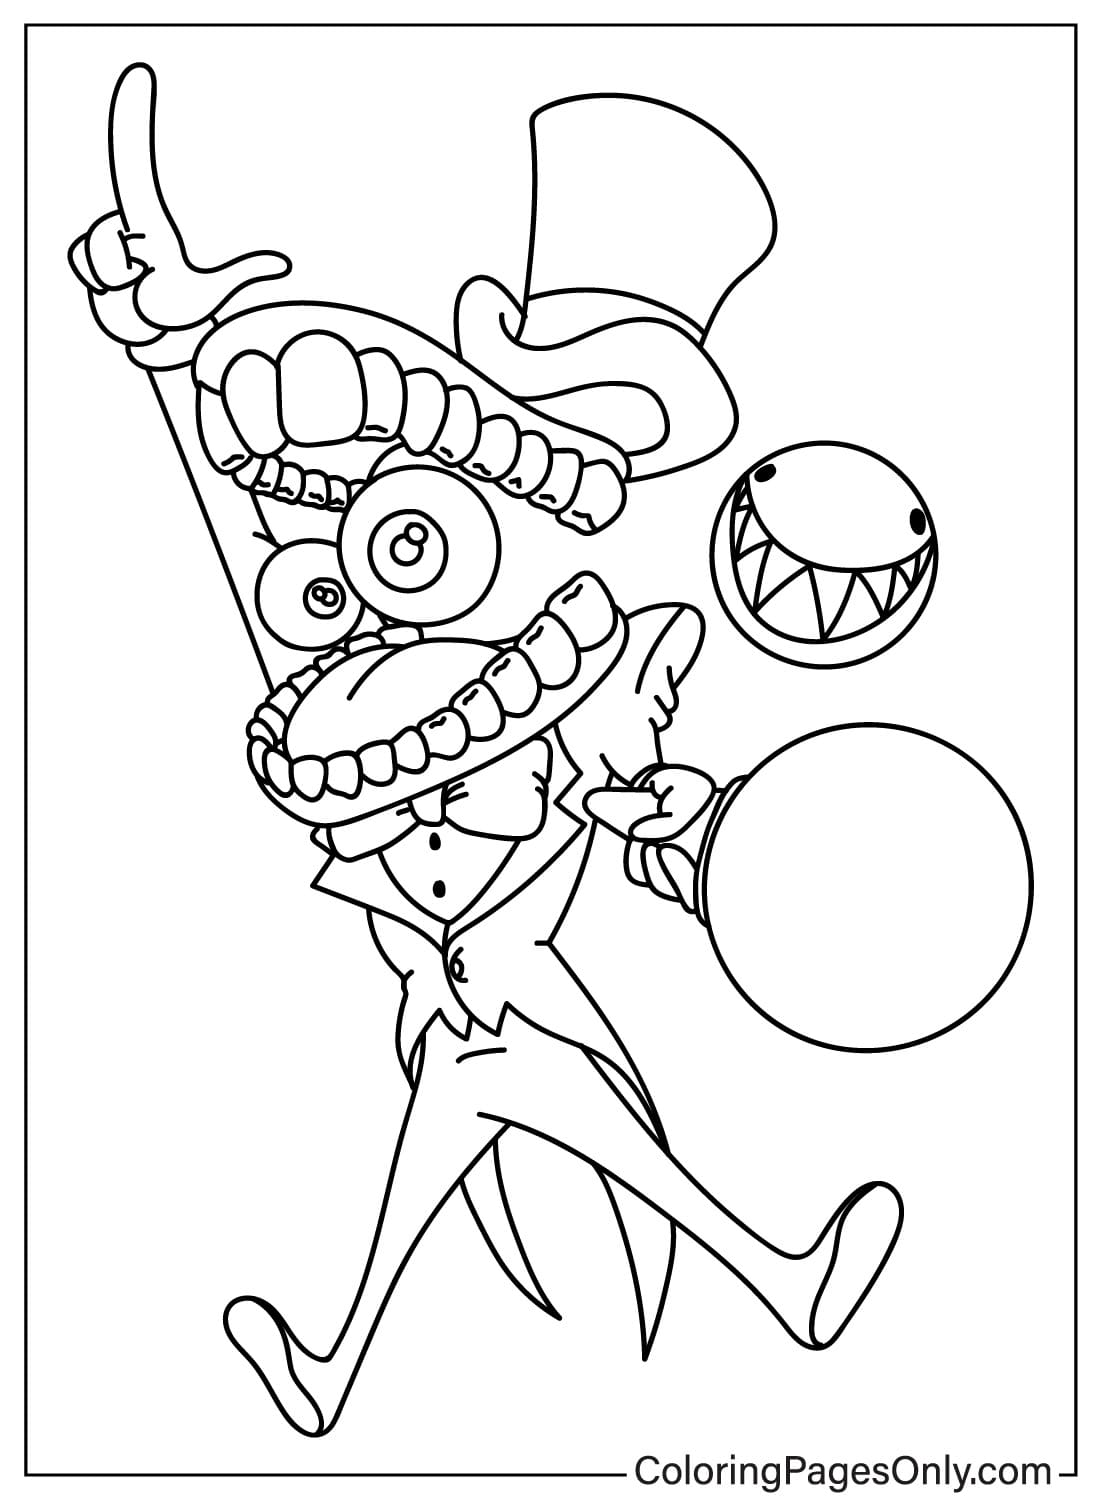 Caine Coloring Pages to Printable from Caine